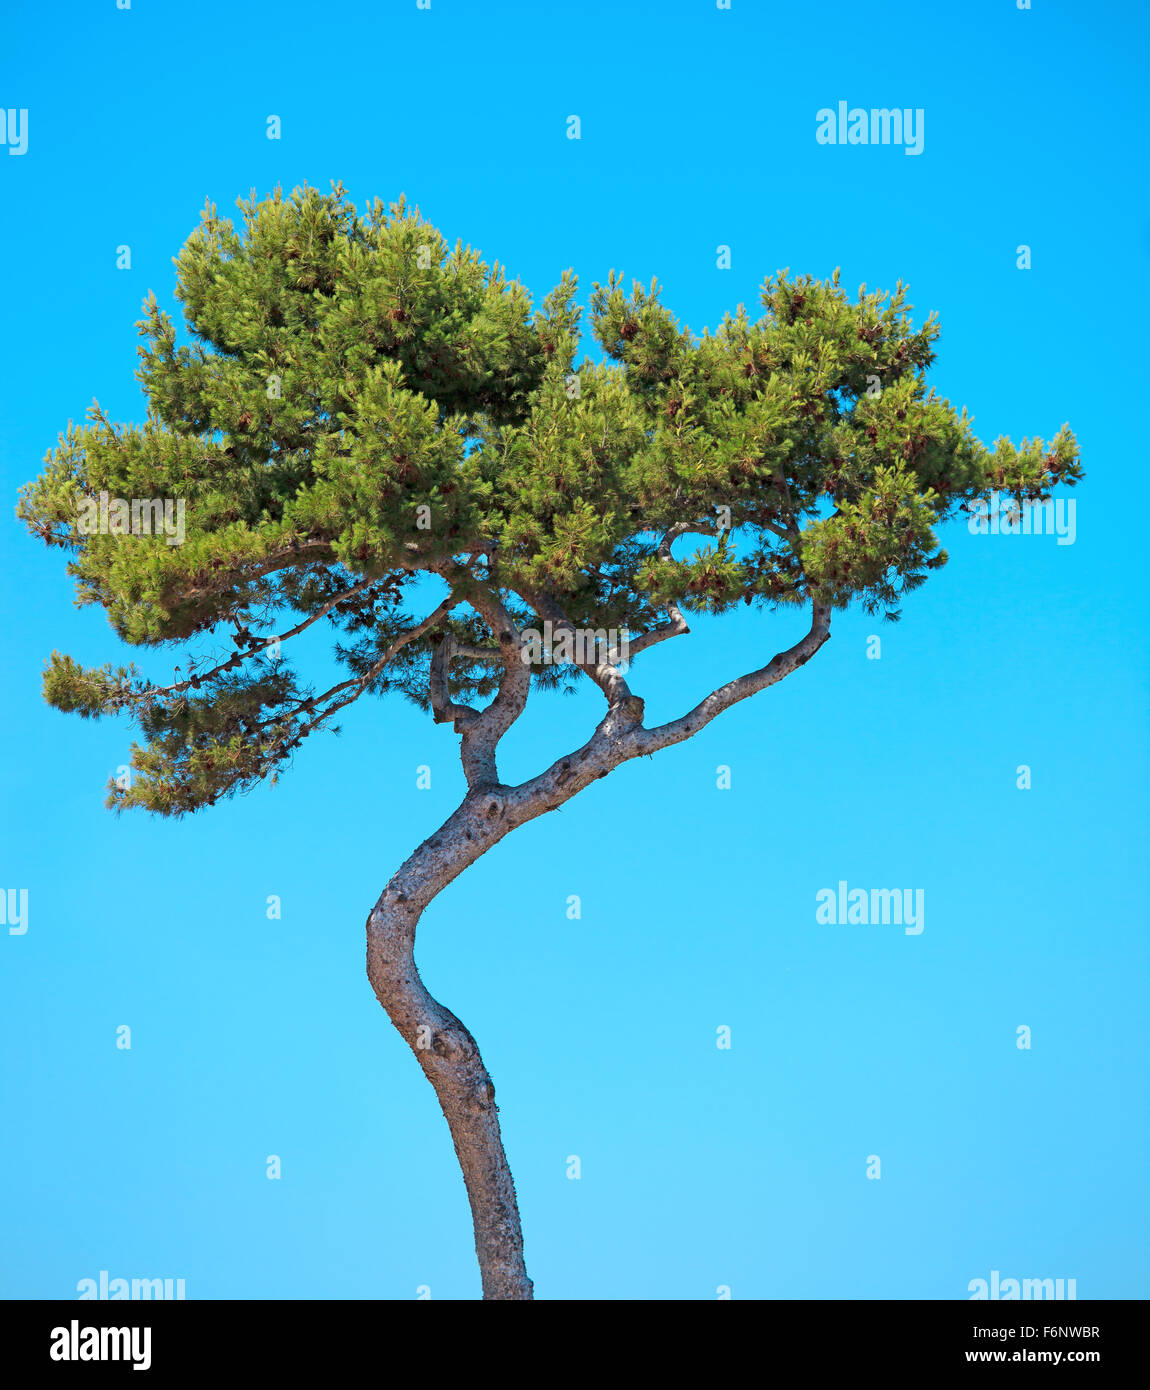 Maritime Pine curved tree, Pinus Pinaster mediterranean plant, isolated on blue sky background. Juan les Pins, Provence, France. Stock Photo